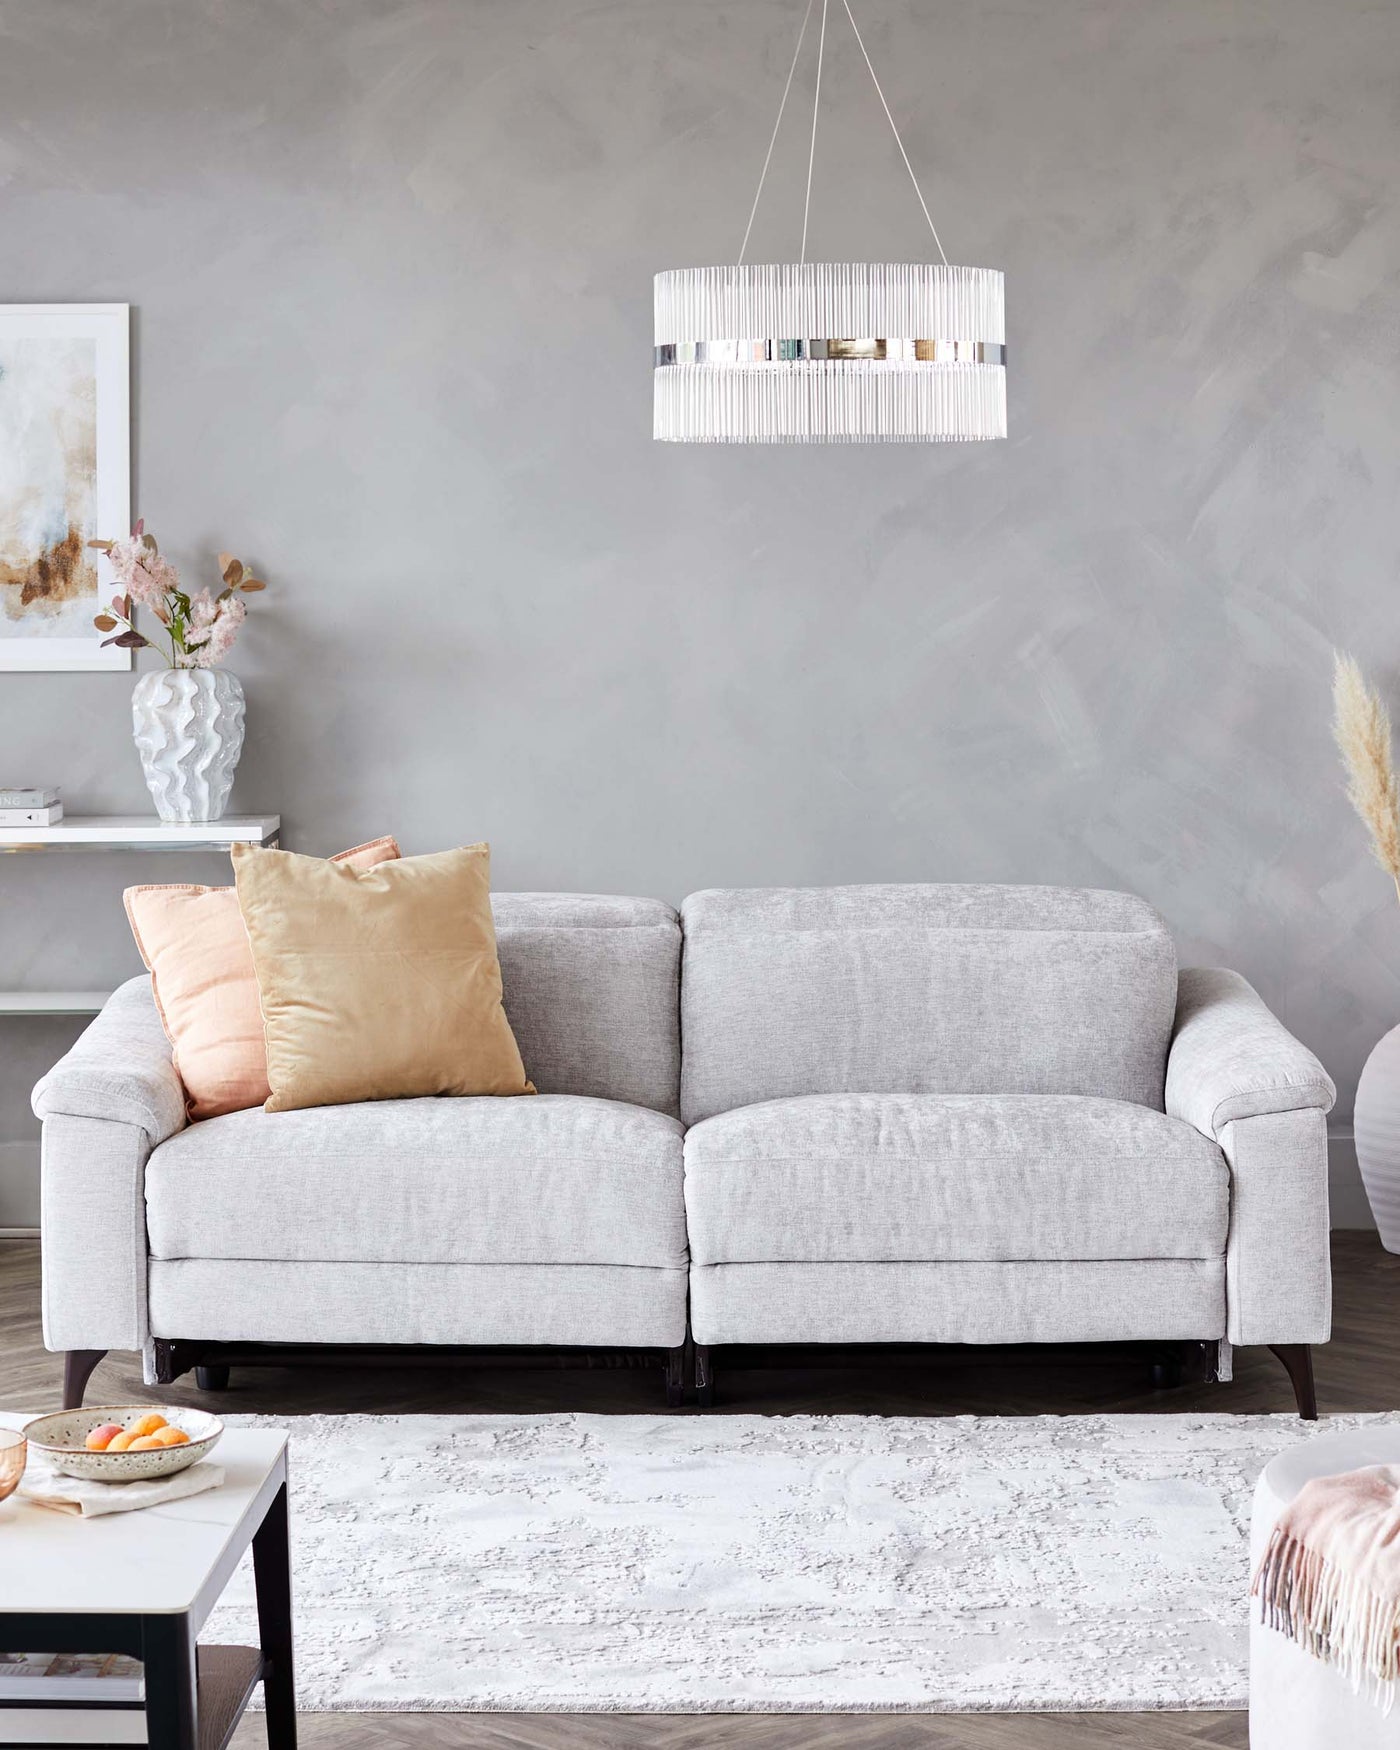 Modern light grey fabric L-shaped sectional sofa with plush cushions and wooden legs, paired with a rectangular white and grey patterned area rug, in a contemporary living room setting. A small white side table with a decorative vase is partially visible.